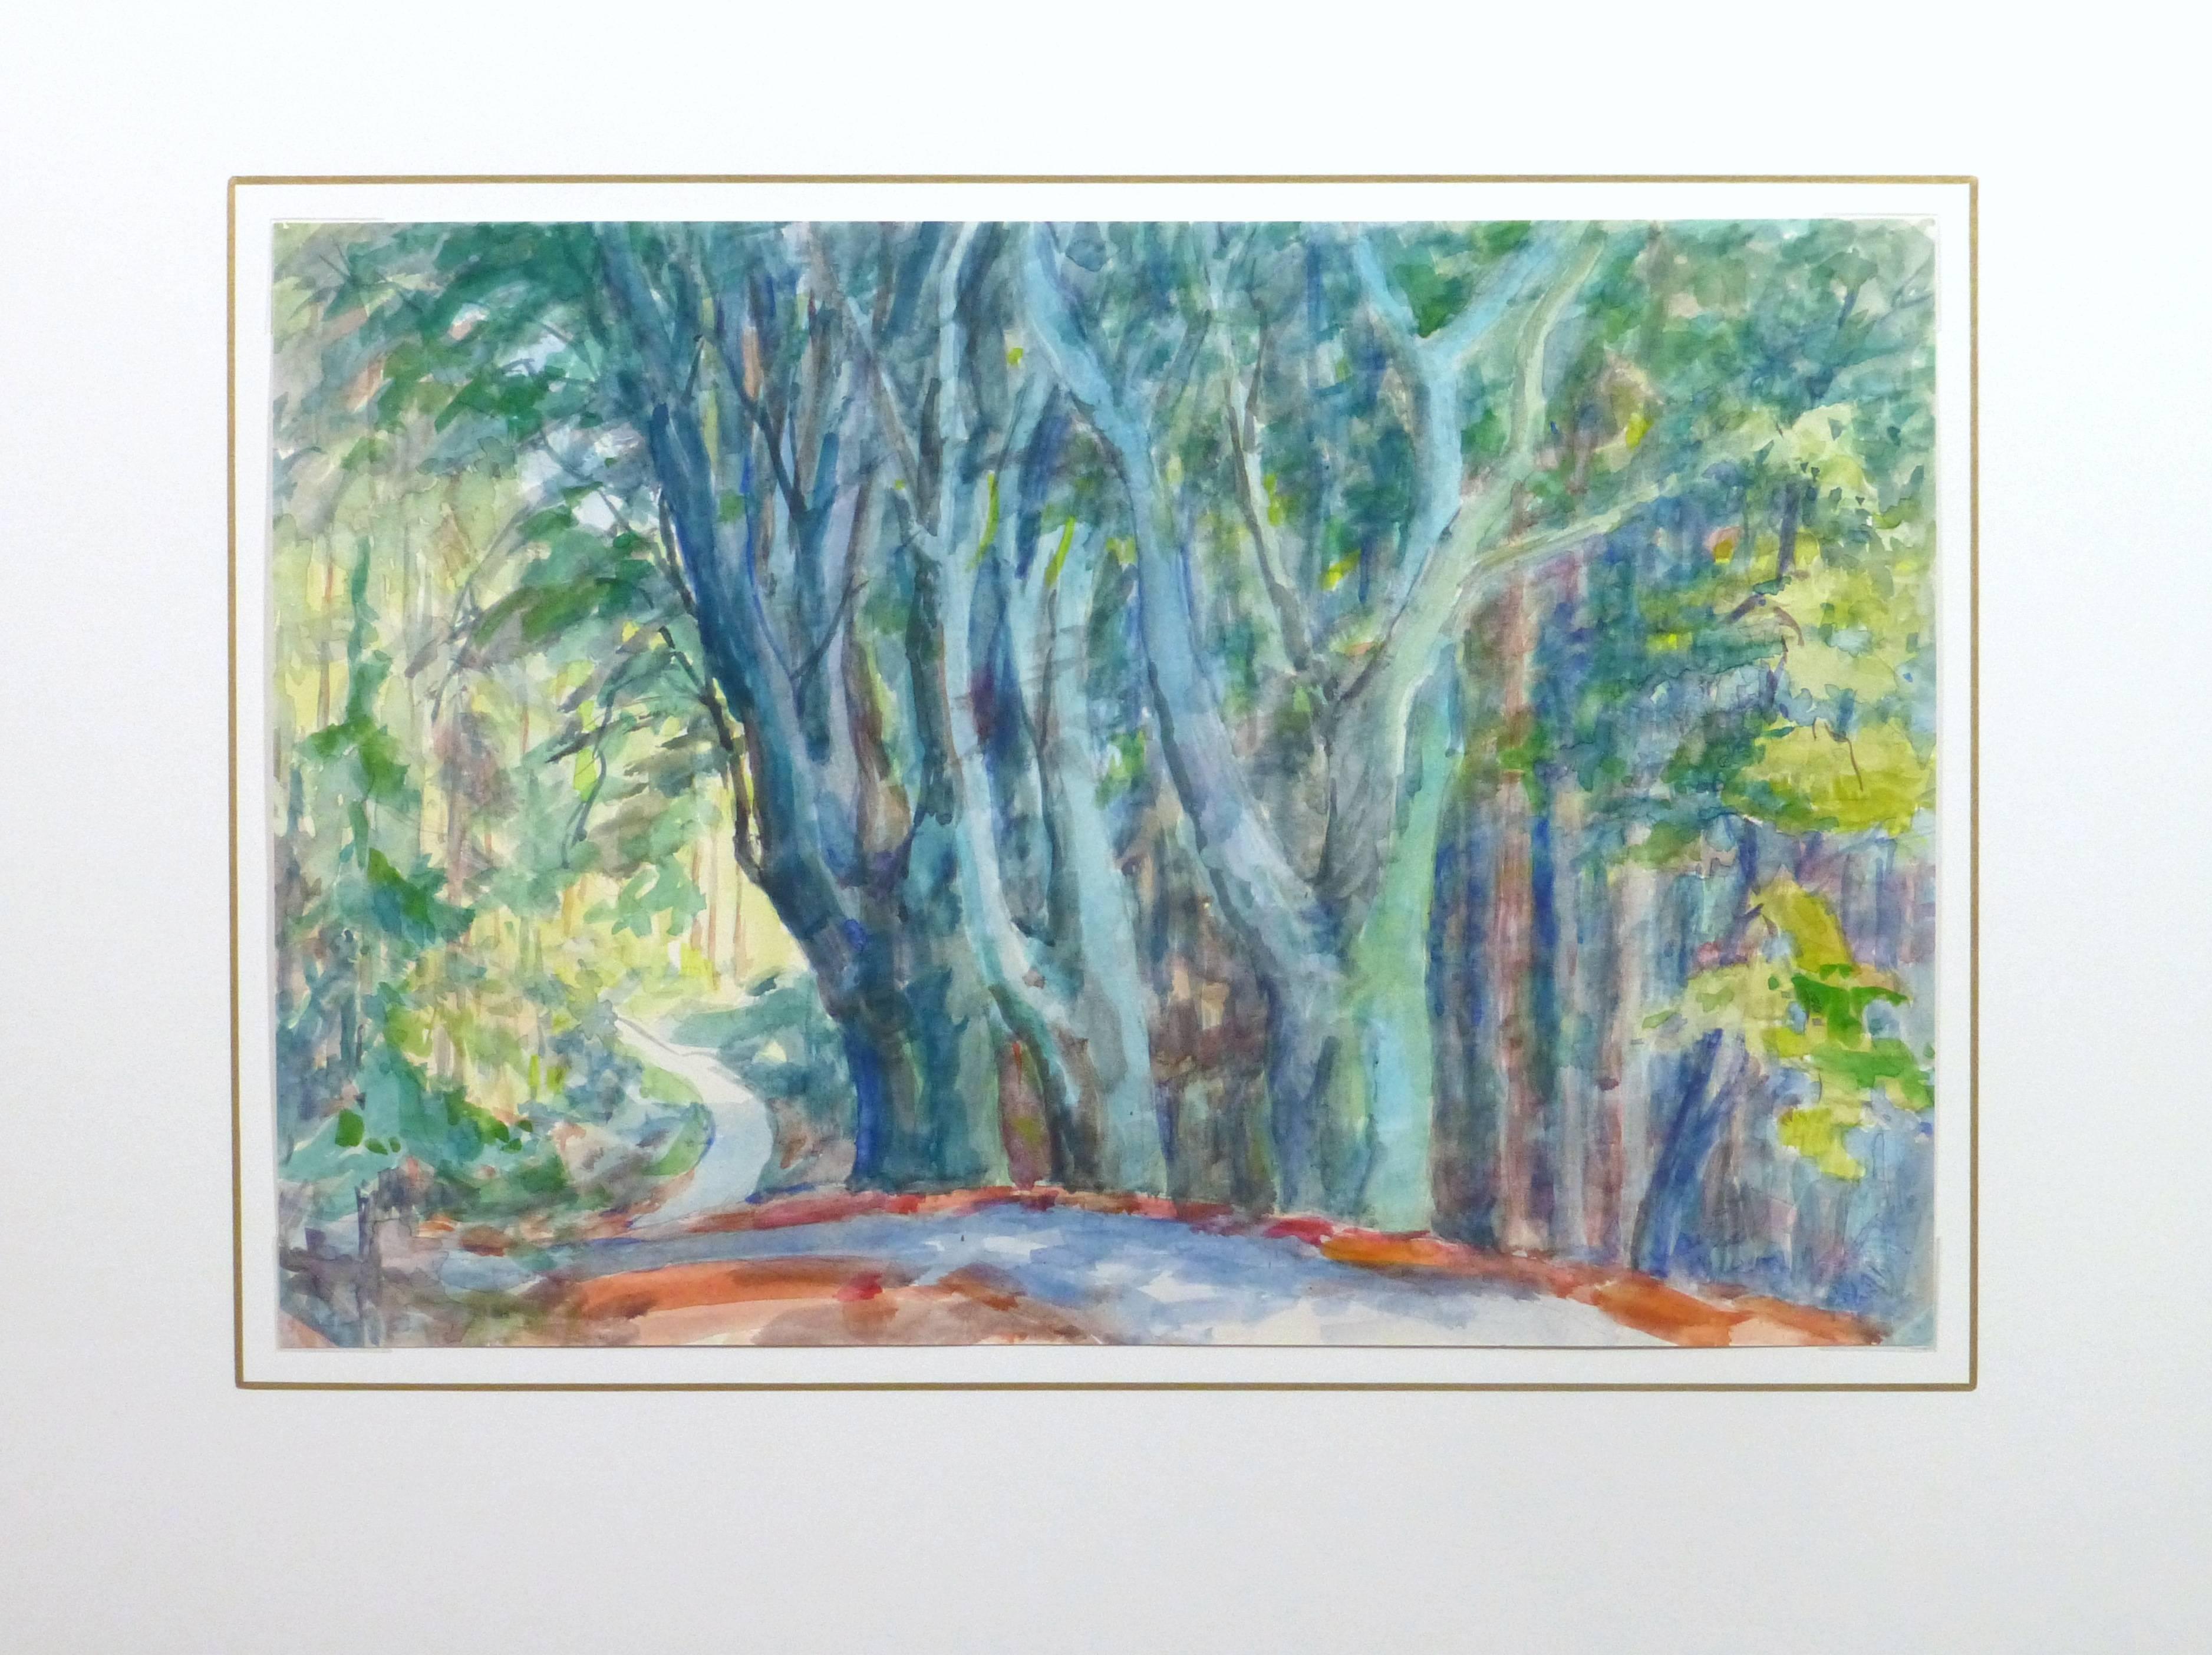 Captivating watercolor painting of a small foot path edged by a dense forest and leading to a sunlit clearing by artist Wilheim Kloden, circa 1990. 

Original artwork on paper displayed on a white mat with a gold border. Archival plastic sleeve and